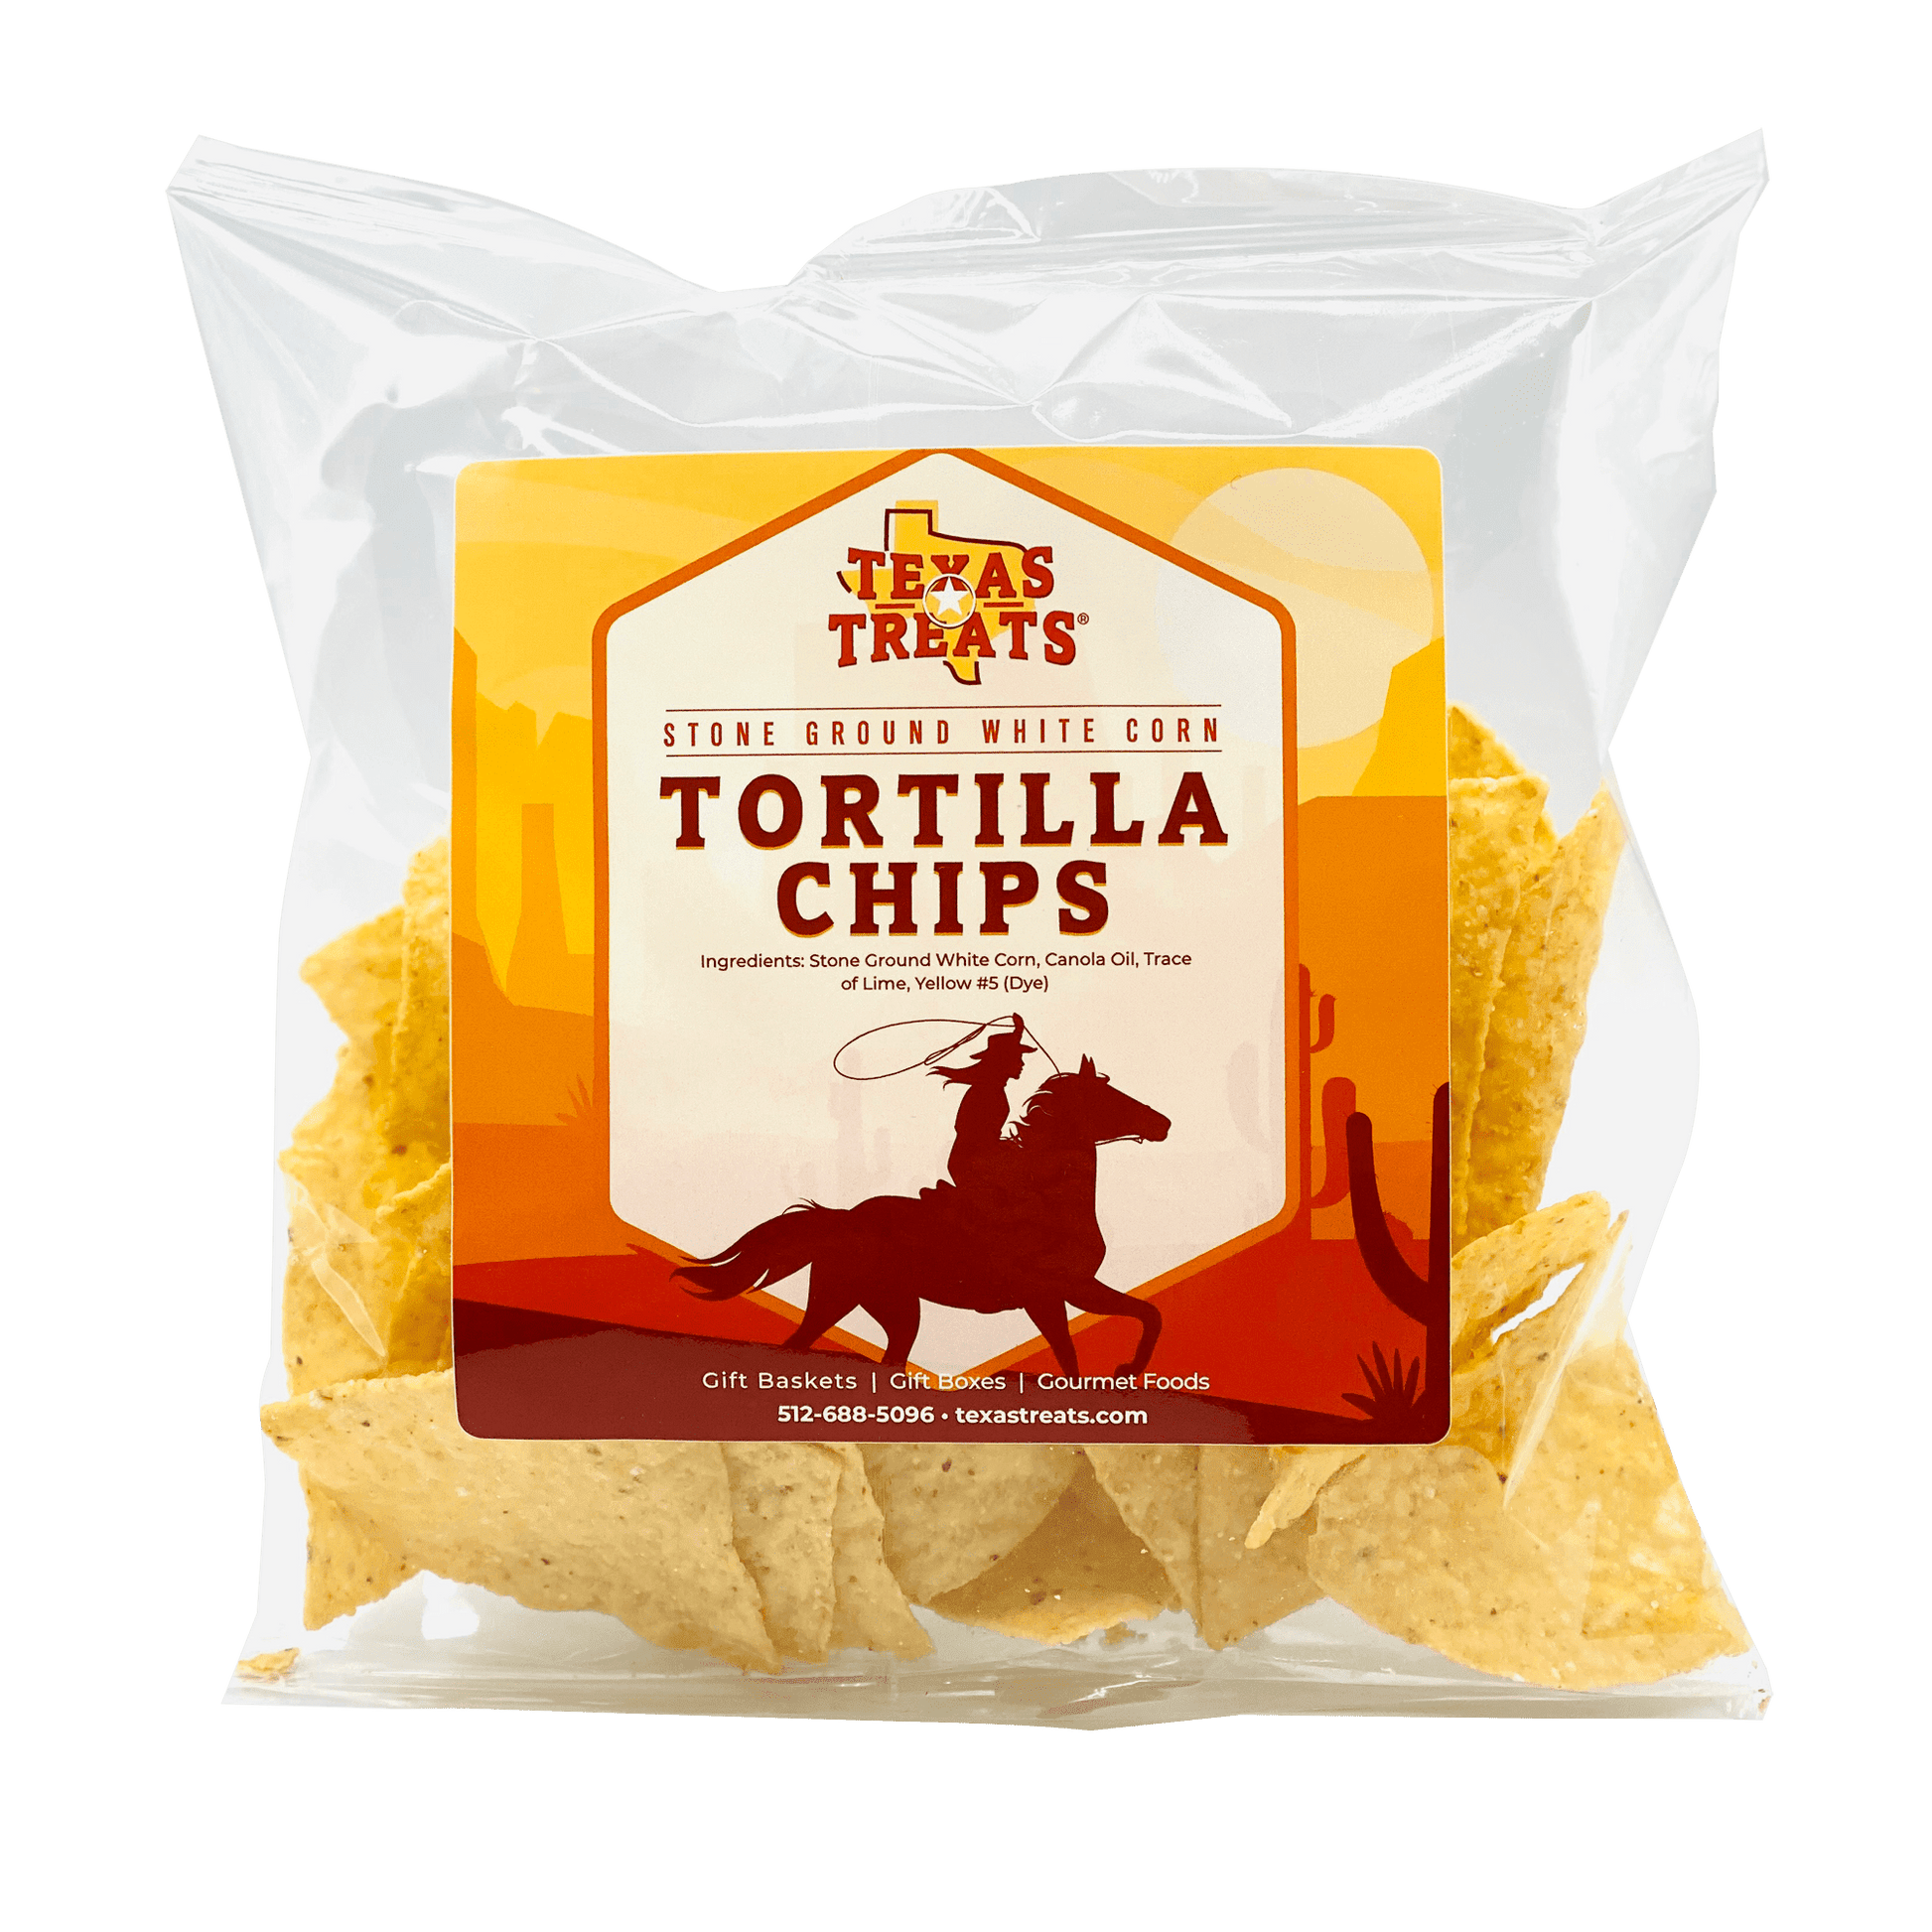 Front of the package of Texas Treats' Texas Tortilla Chips.